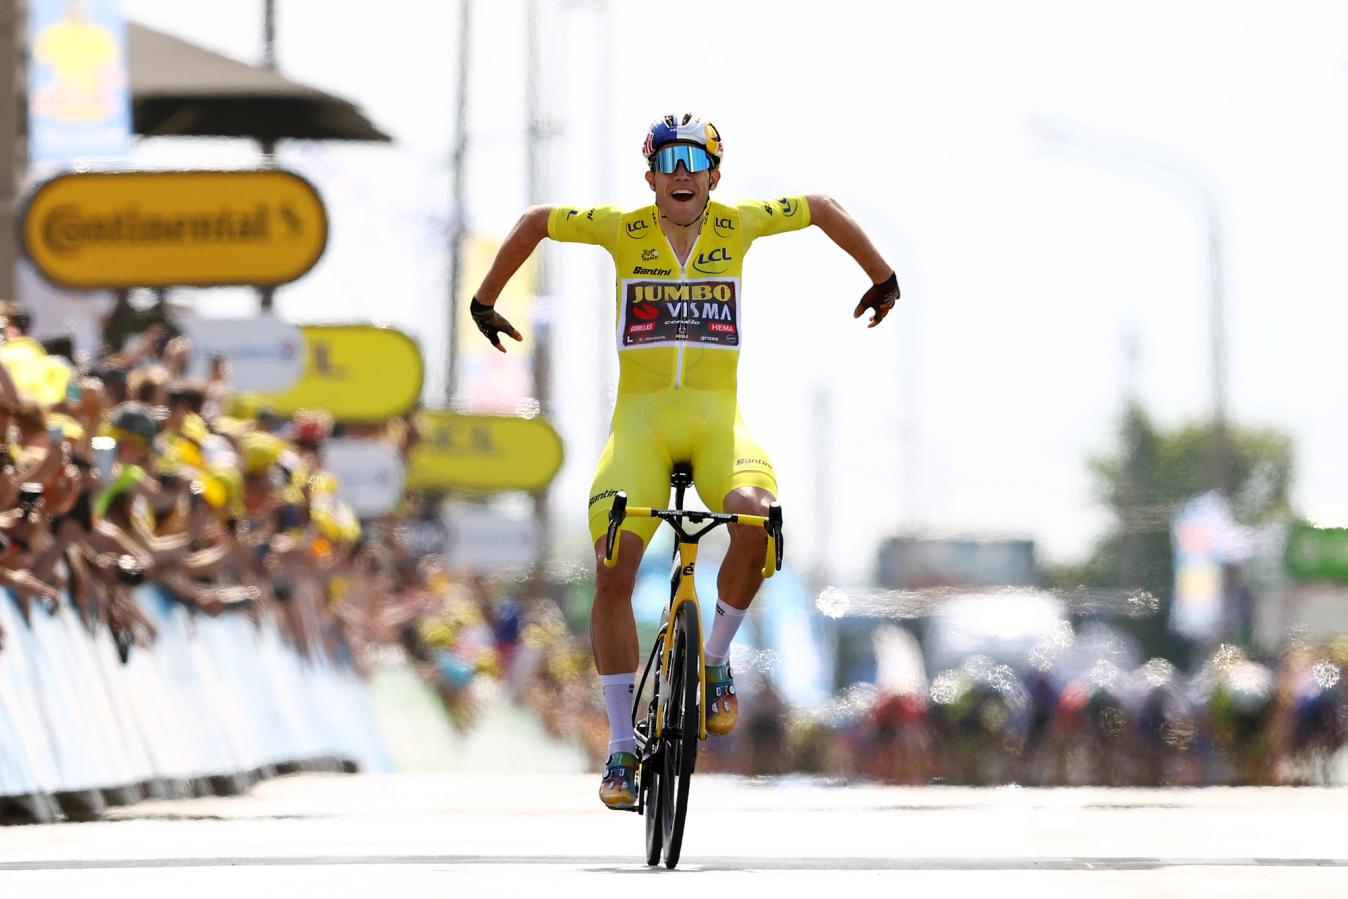 'Red Bull gives you the wings' is the message from Wout van Aert as he wins stage 4 of the 2022 Tour de France